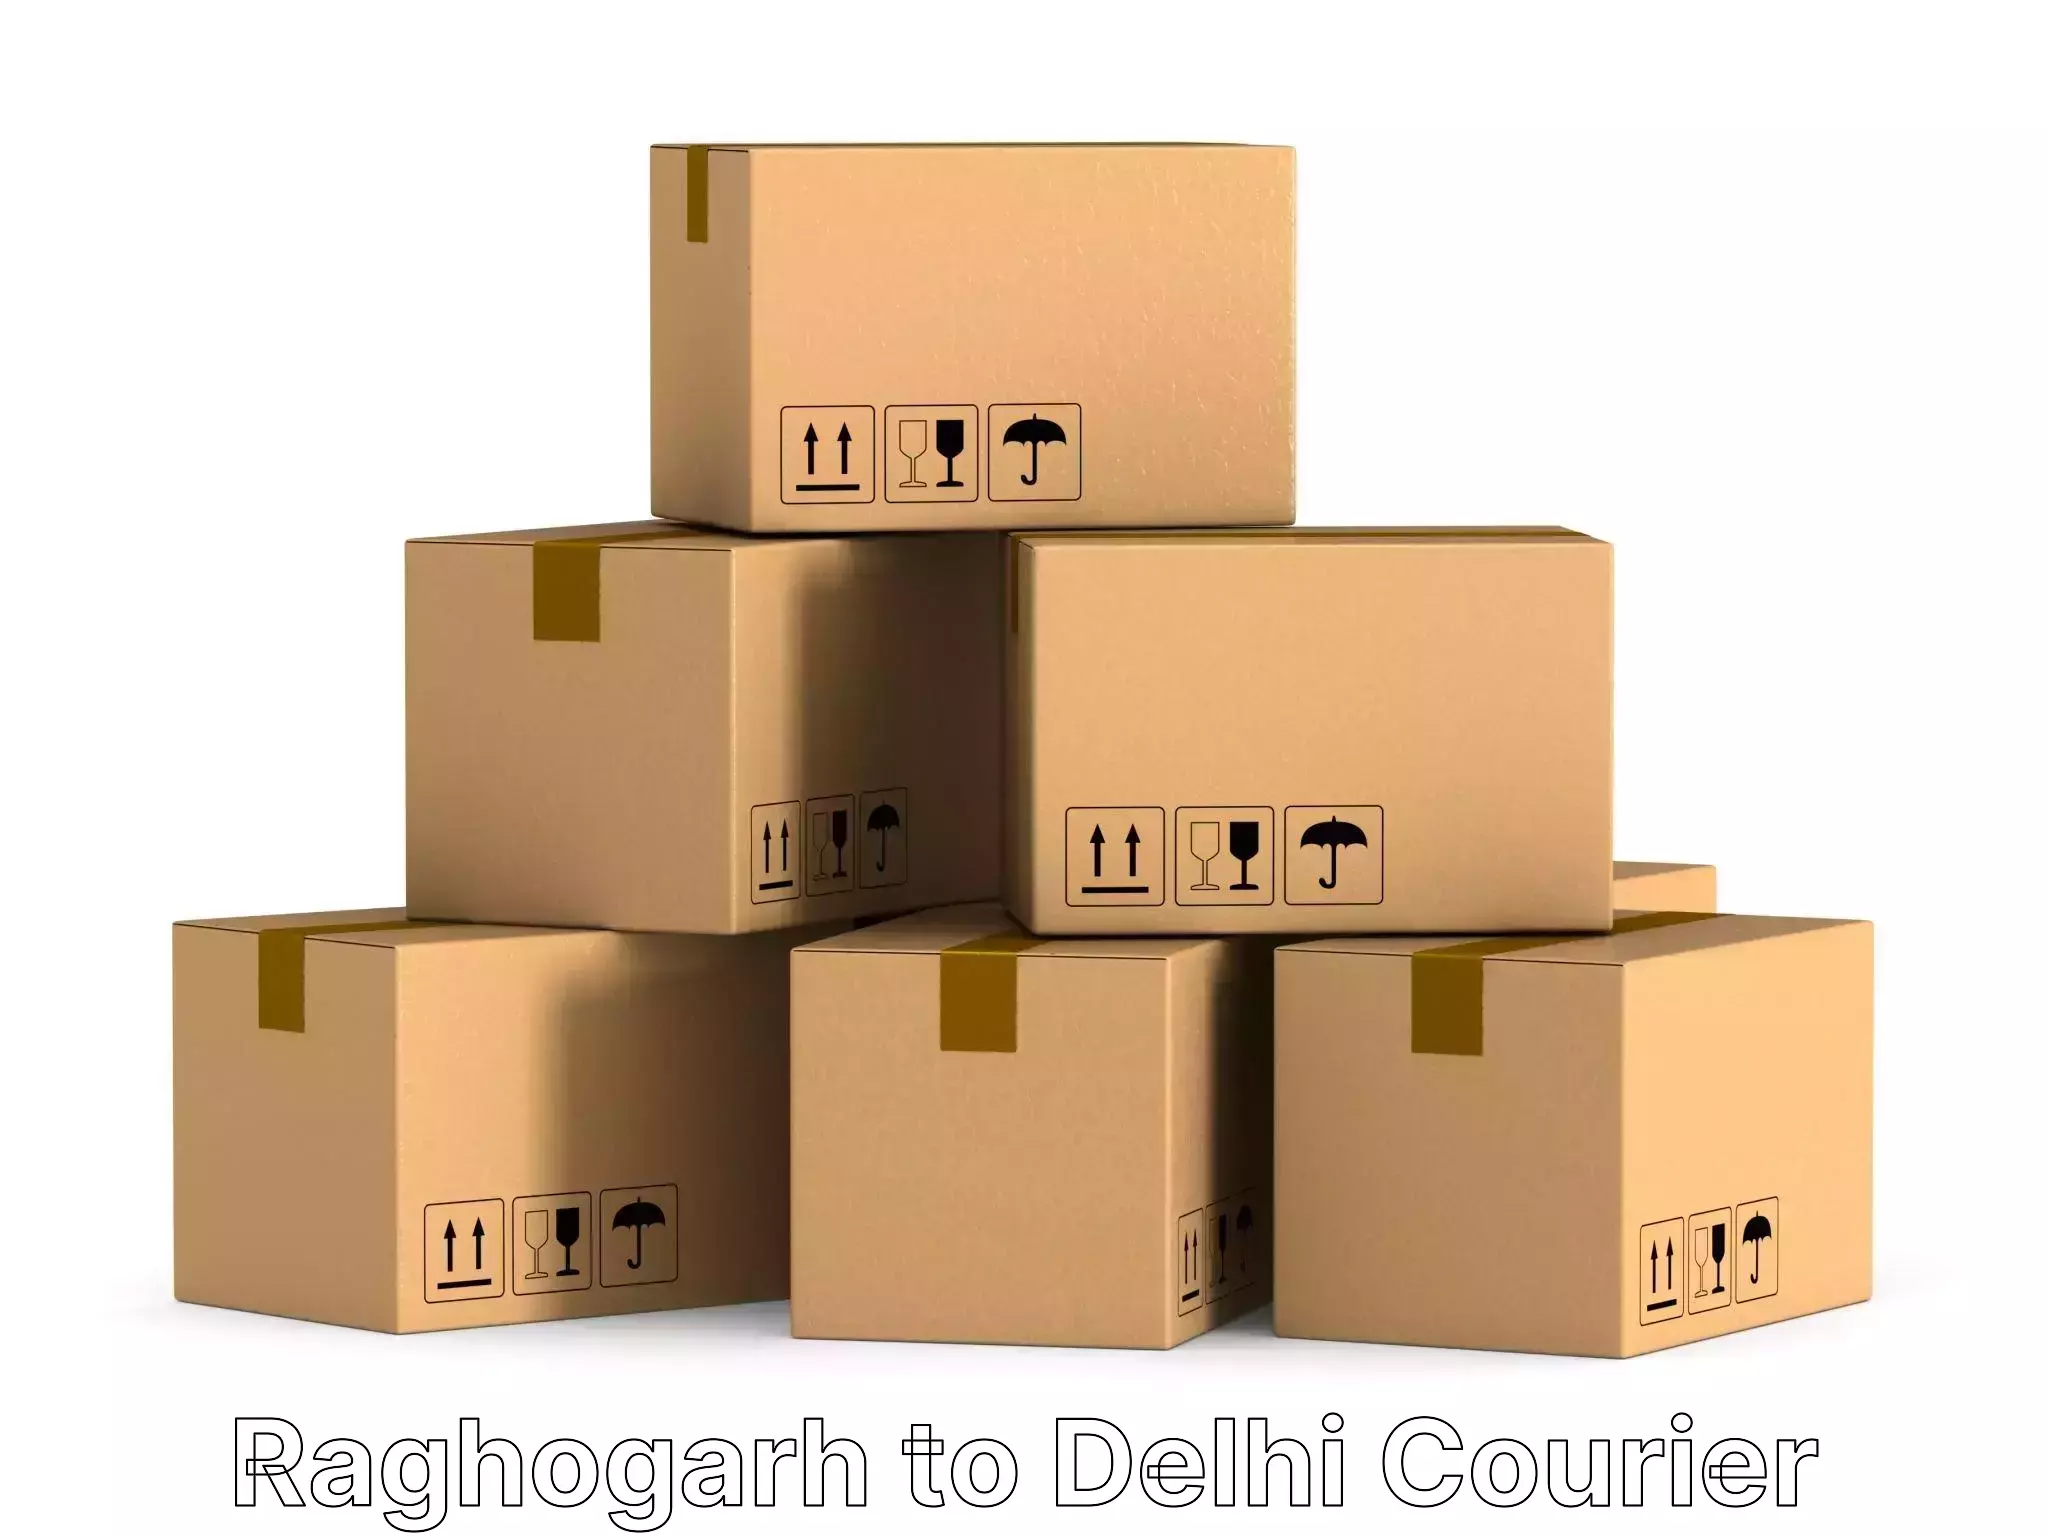 Furniture delivery service Raghogarh to Lodhi Road